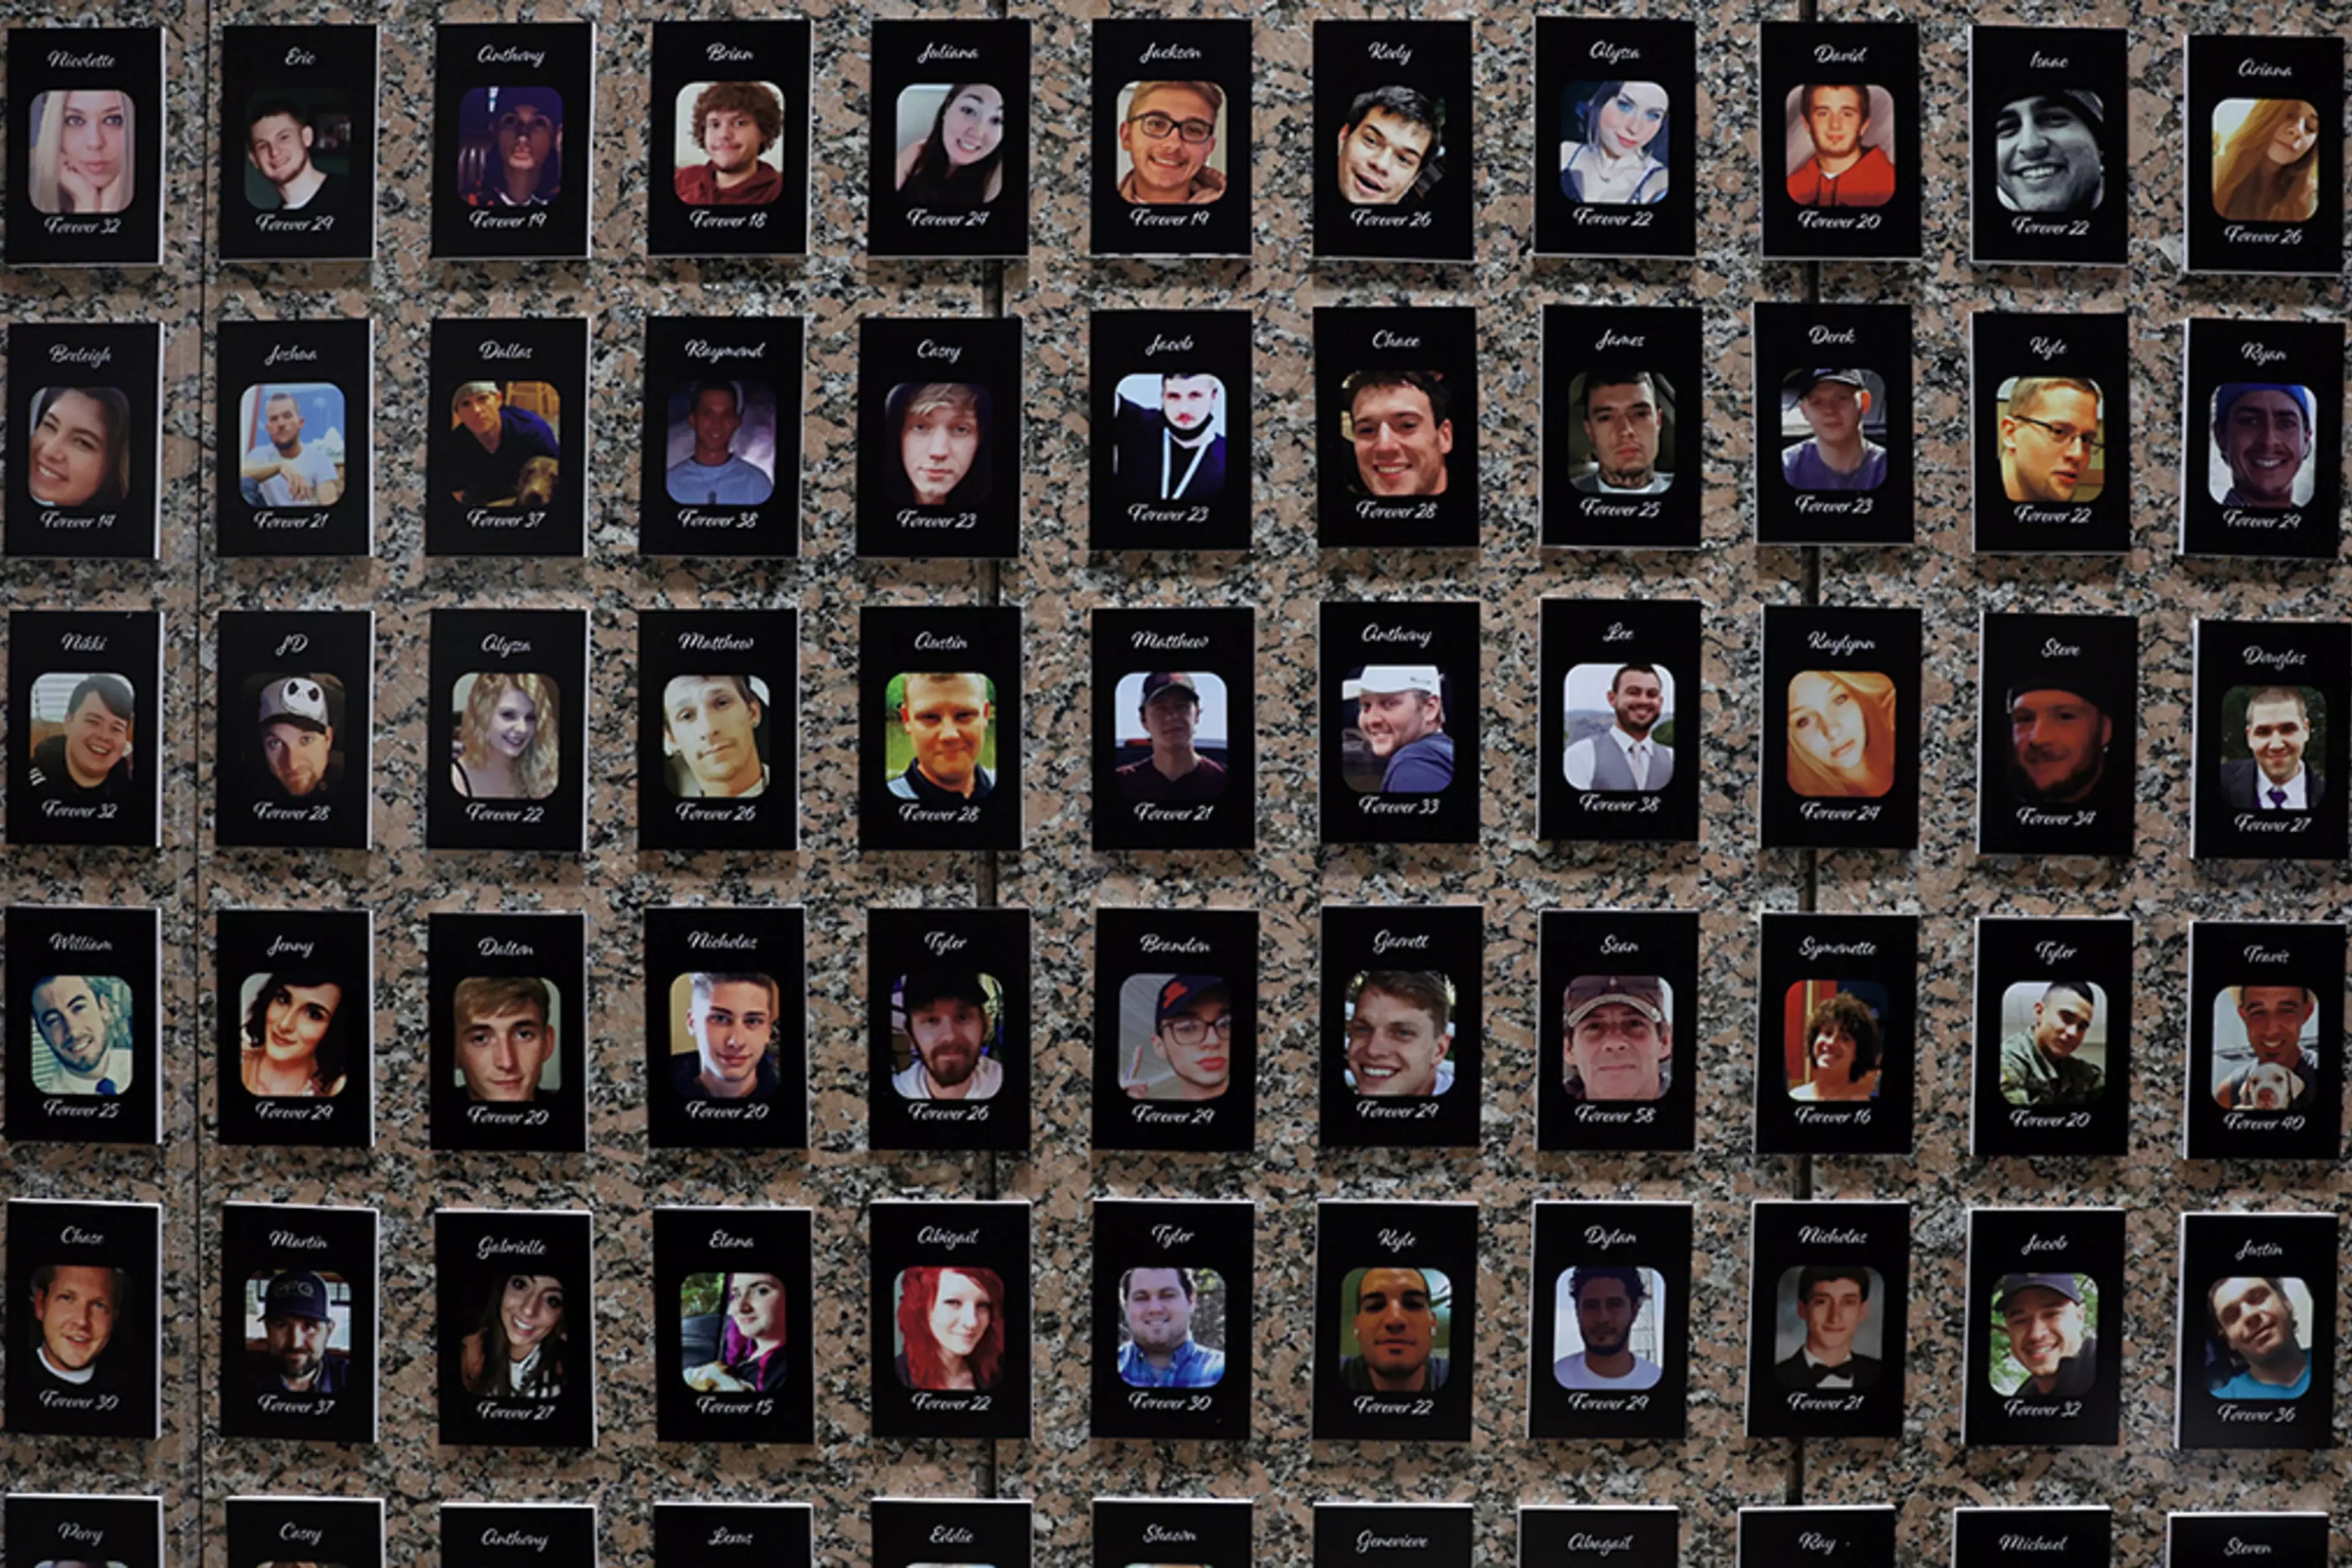 Photos of fentanyl victims shown at the U.S. Drug Enforcement Administration headquarters. 